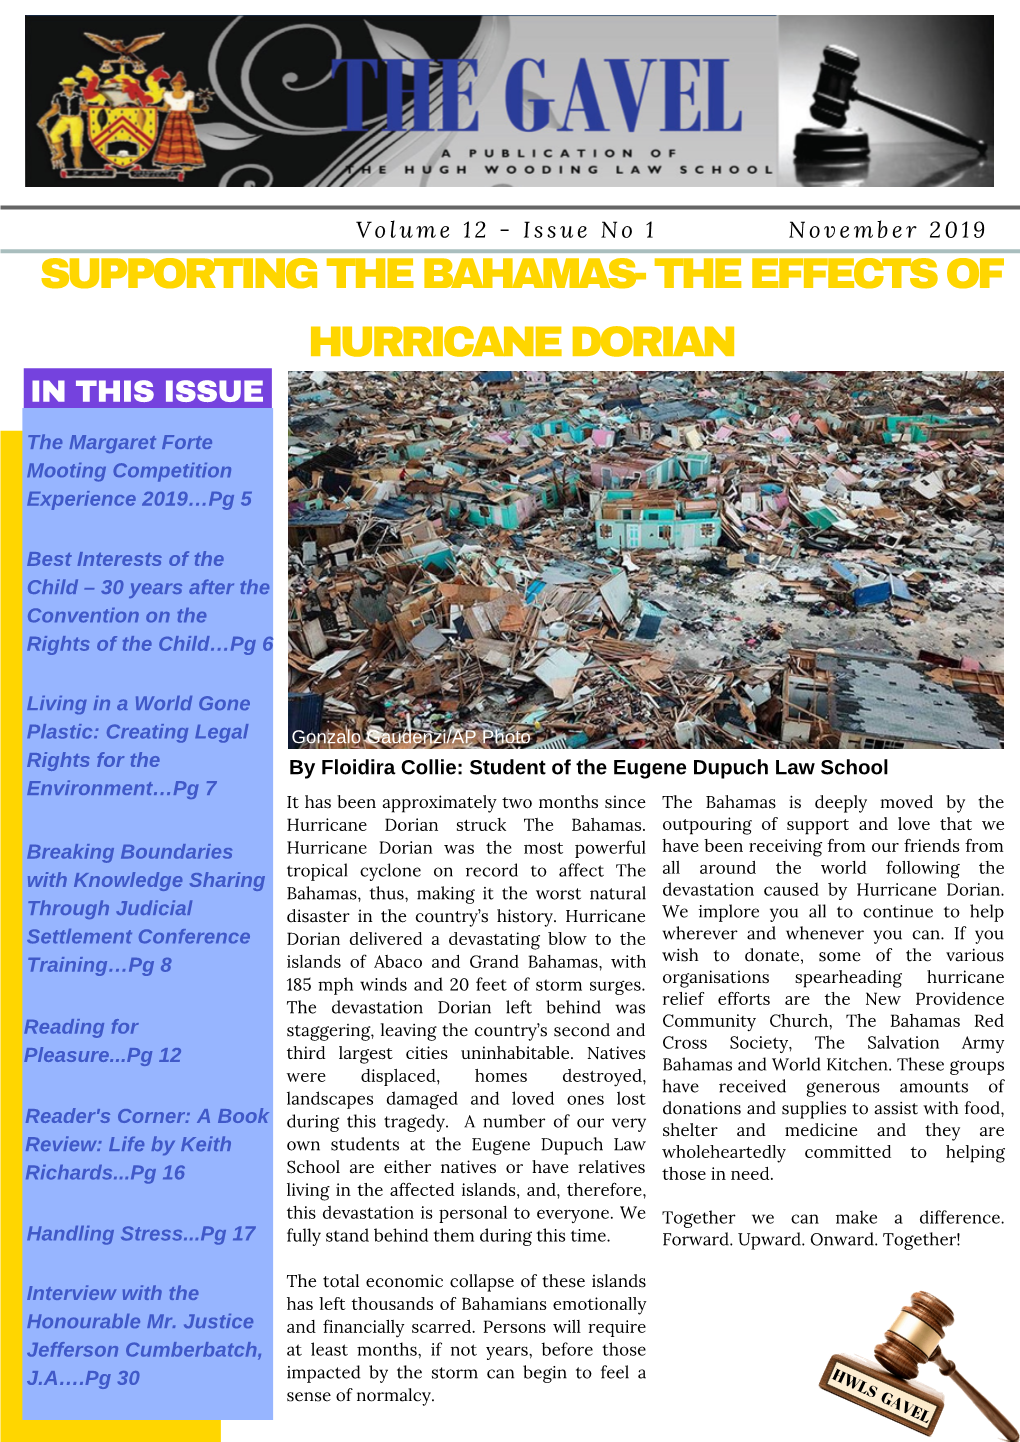 Supporting the Bahamas- the Effects of Hurricane Dorian in This Issue